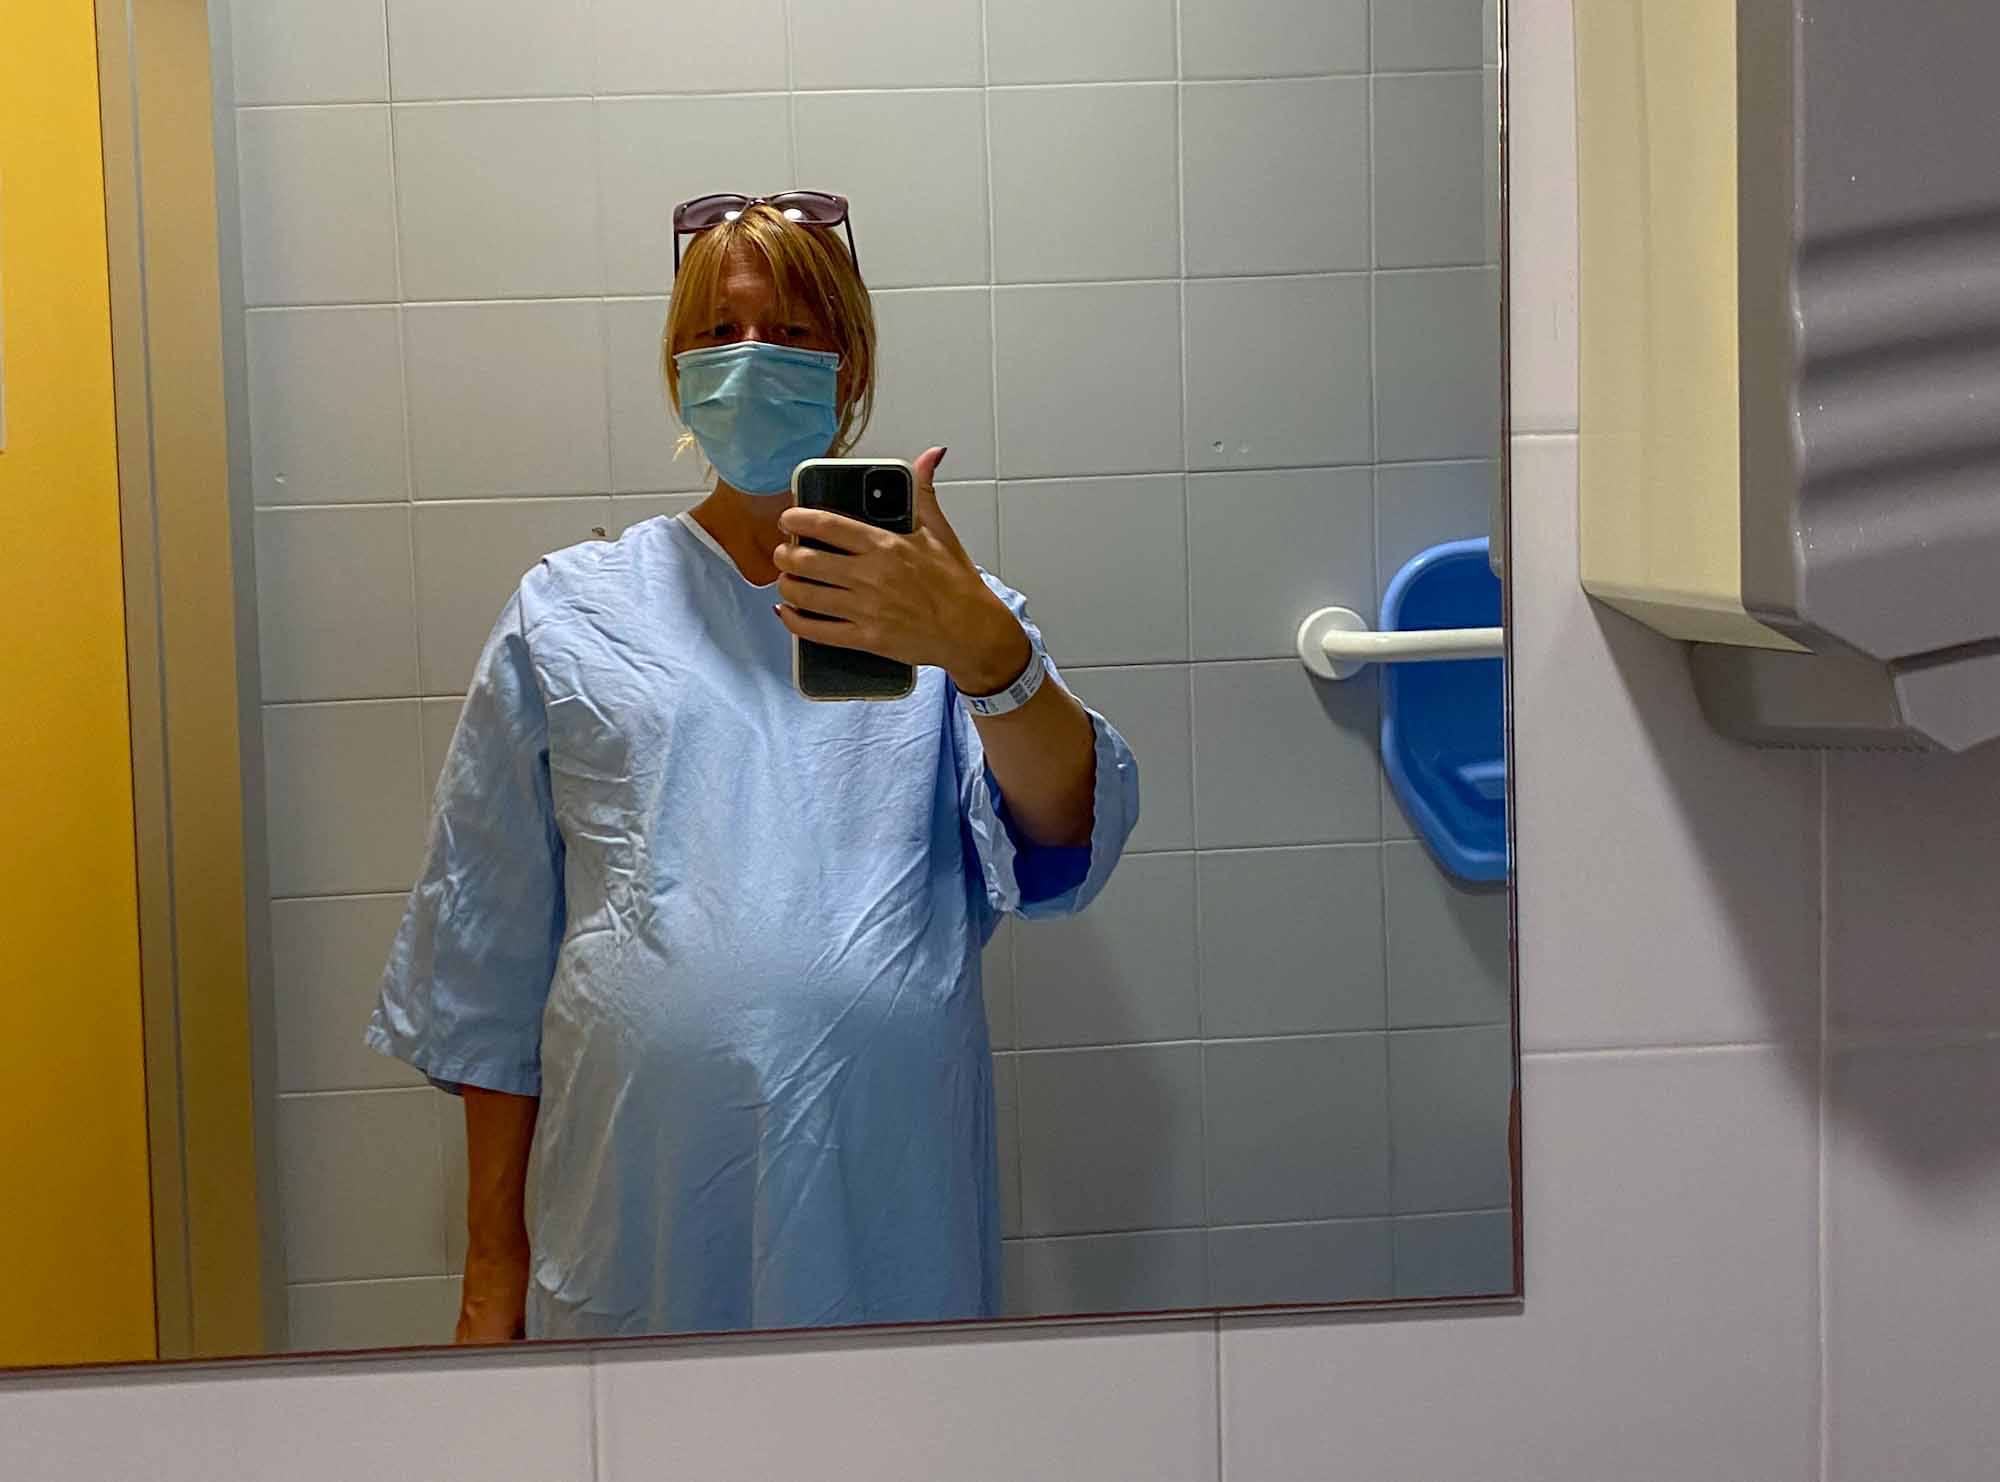 Pregnant lady wearing a face mask, taking a picture of herself in the mirror